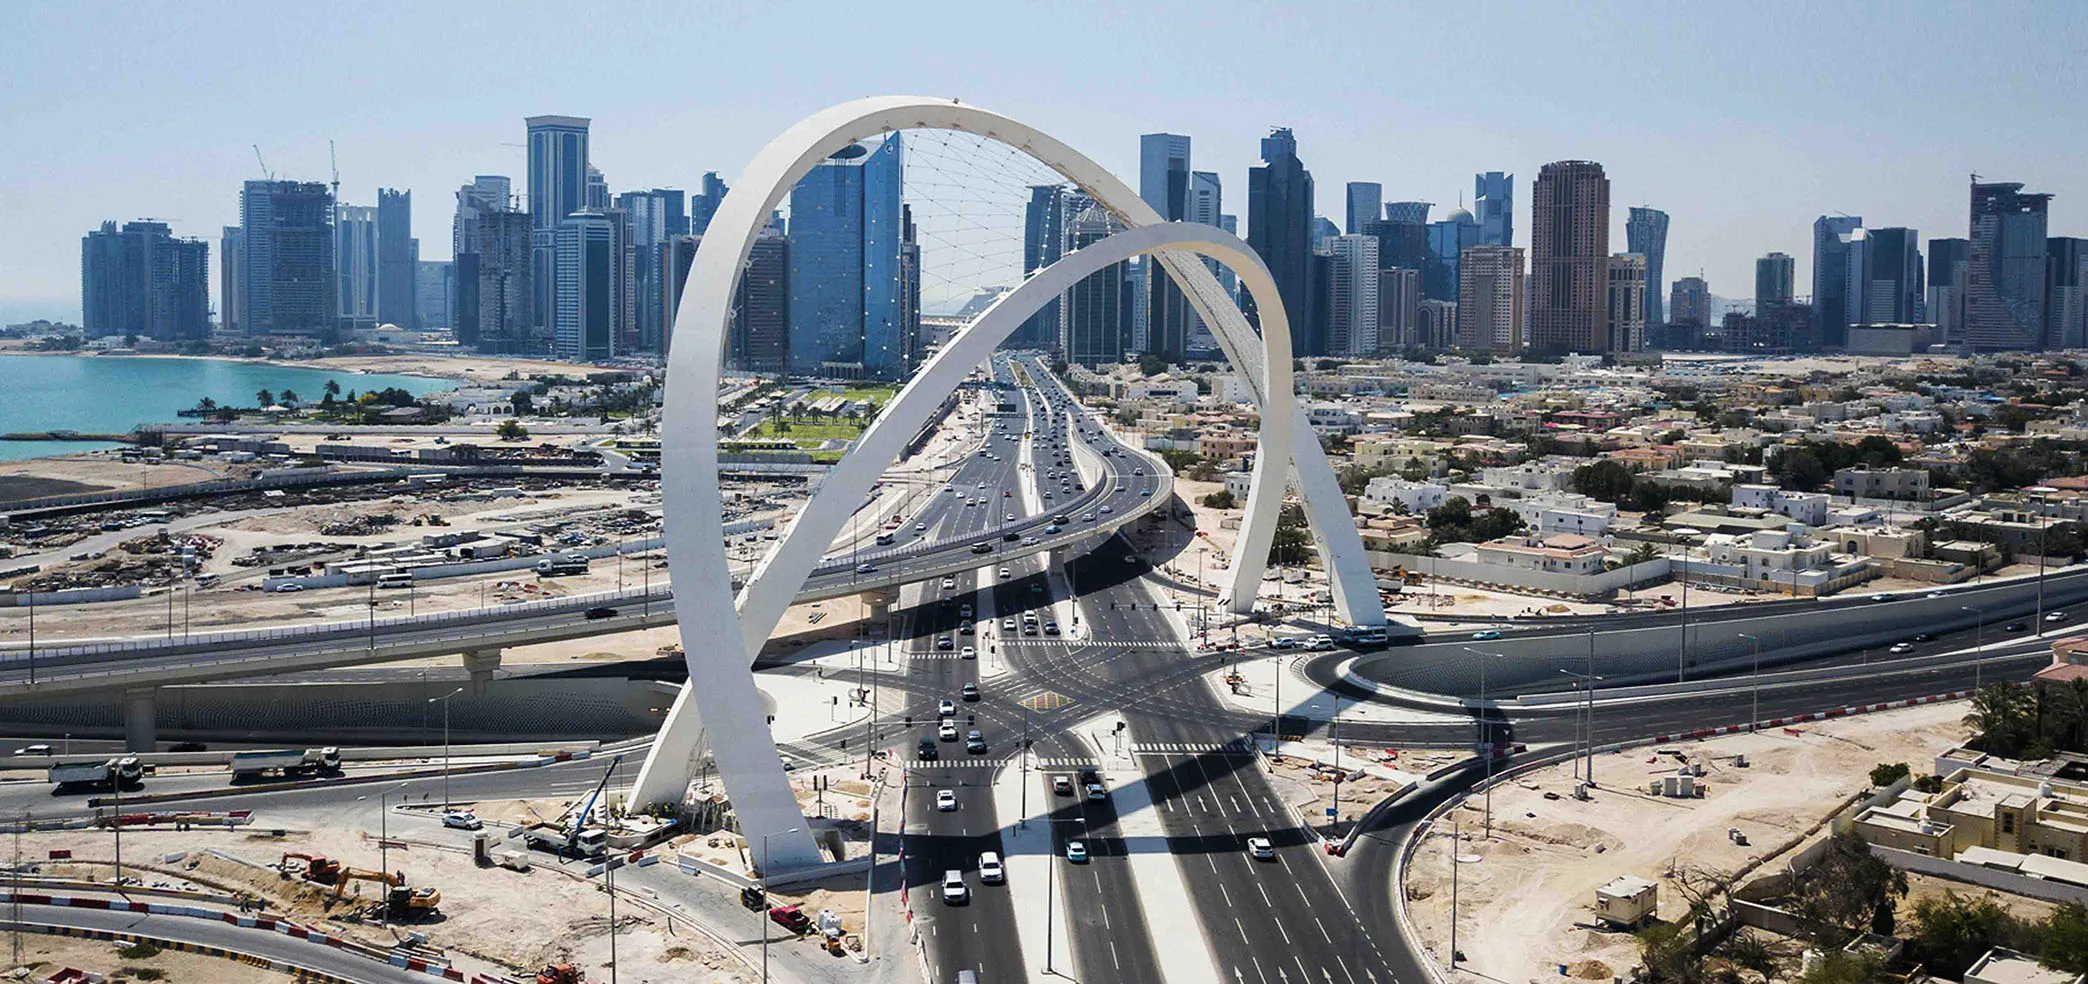 Al Wahda Arches, Qatar. Maffeis Engineering's adoption of Resilio Connect has transformed their ability to share and collaborate across sites in real-time—on mission-critical projects.